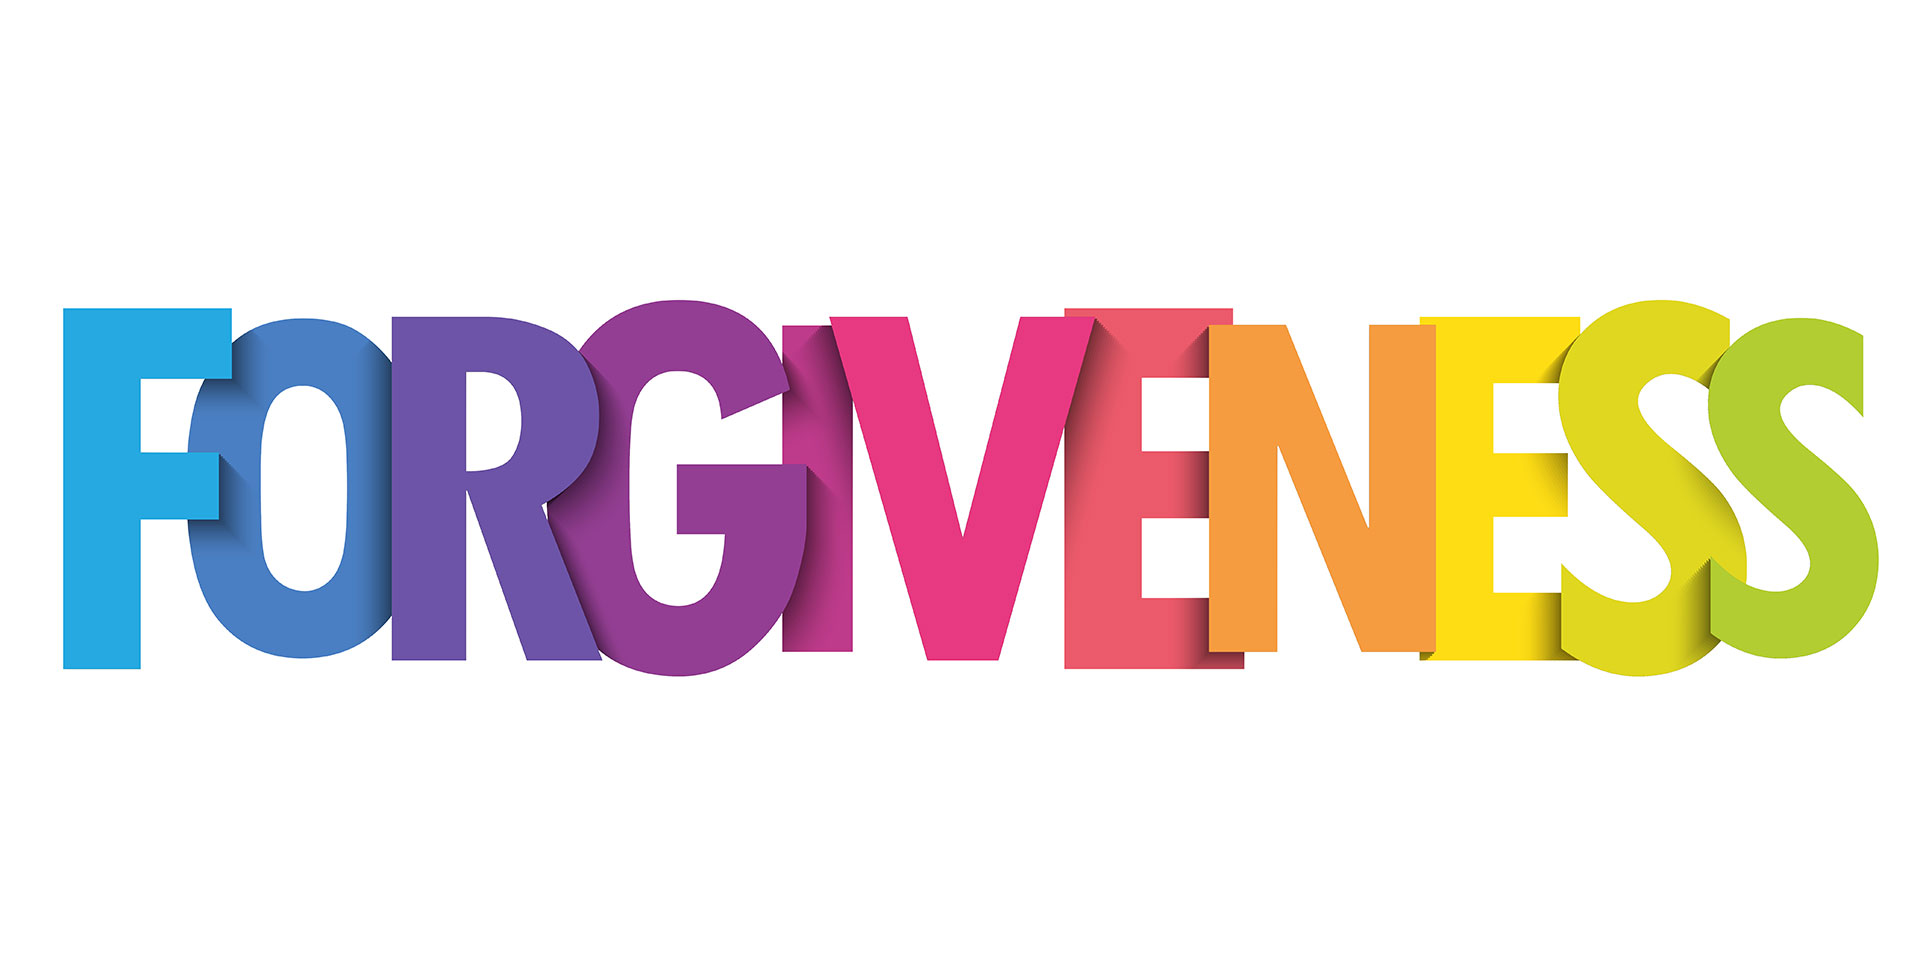 Forgiveness: Do Christians have a hard time understanding?